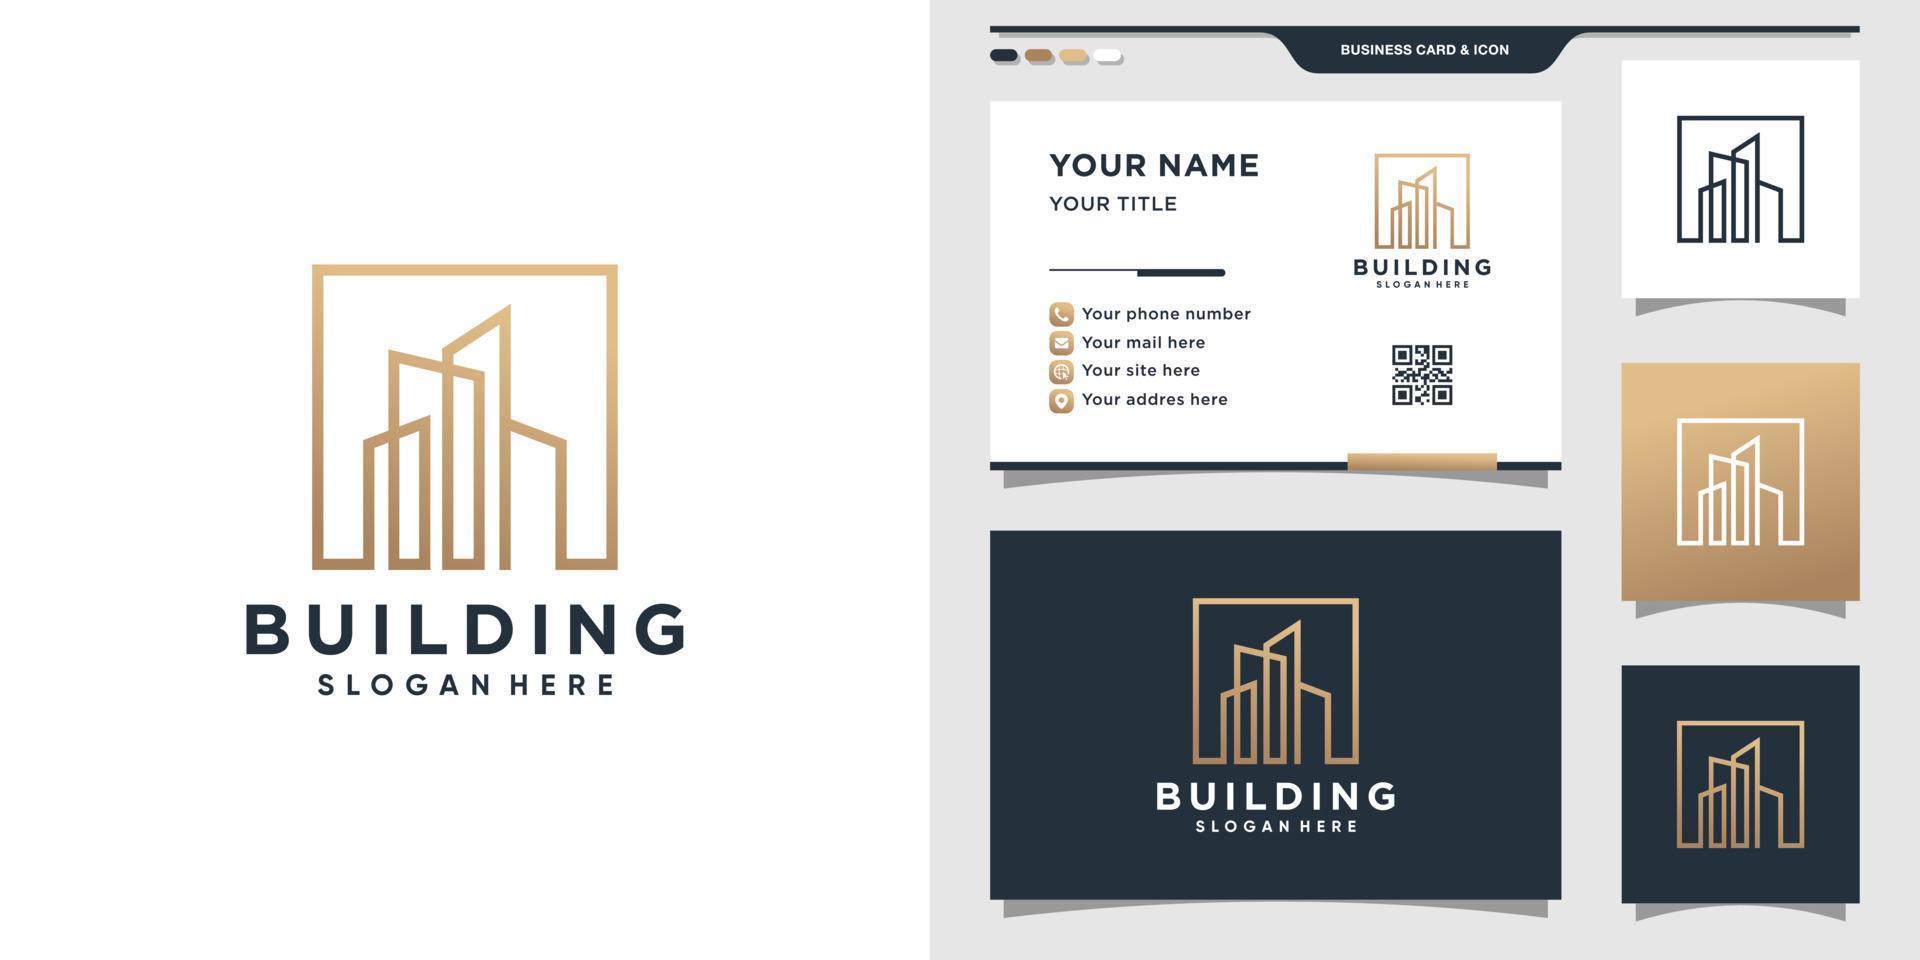 Building logo design with line art style and square concept. Inspiration logo for construction and business card design. Premium Vector